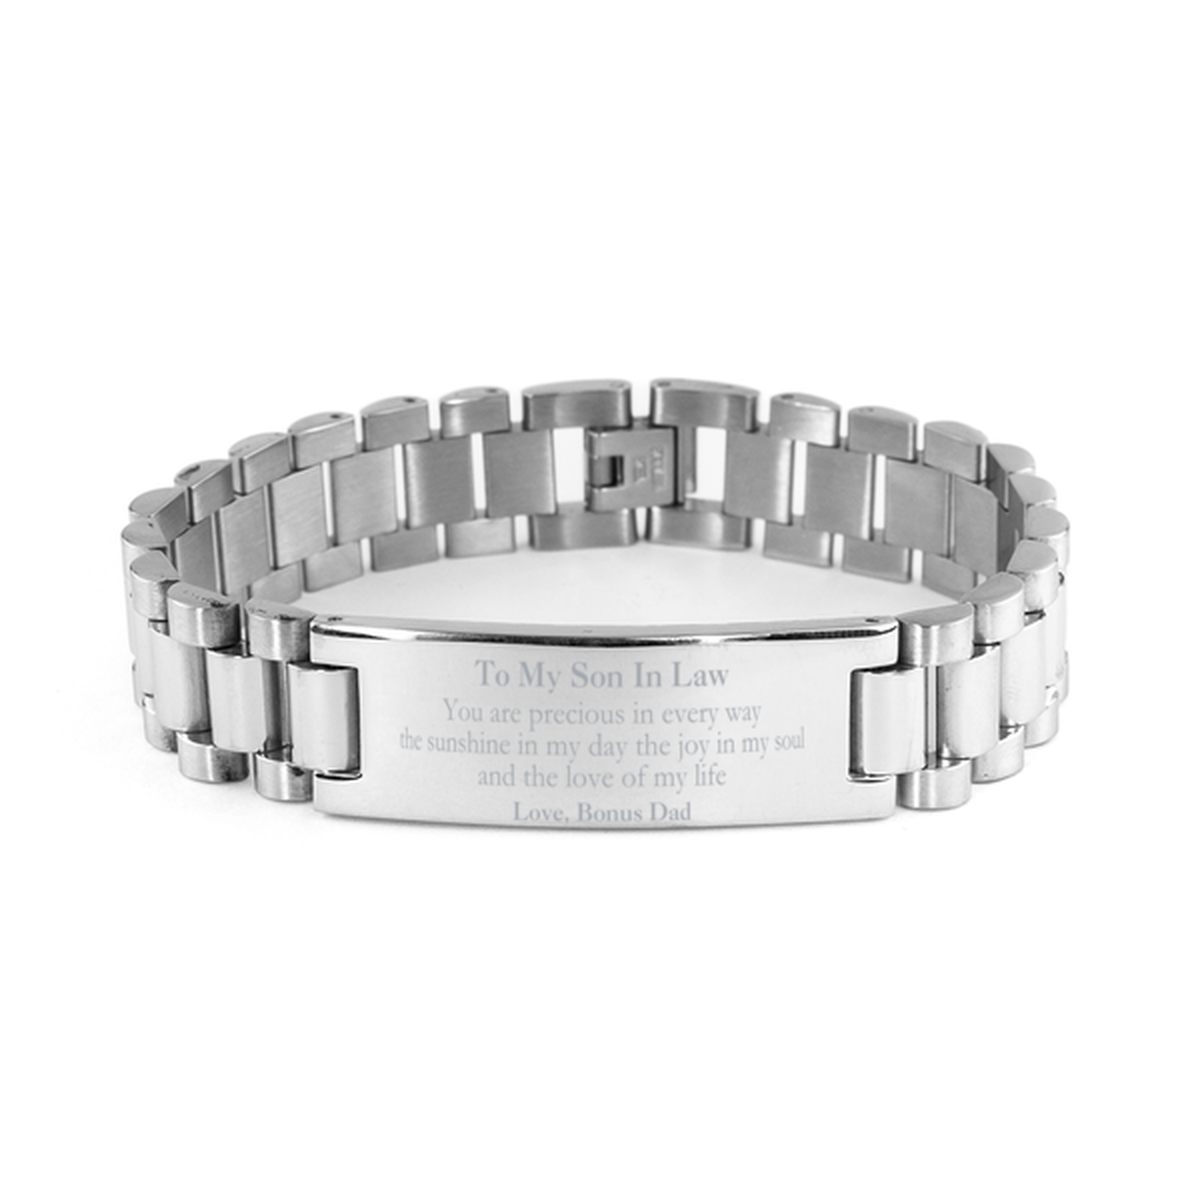 Graduation Gifts for Son In Law Ladder Stainless Steel Bracelet Present from Bonus Dad, Christmas Son In Law Birthday Gifts Son In Law You are precious in every way the sunshine in my day. Love, Bonus Dad